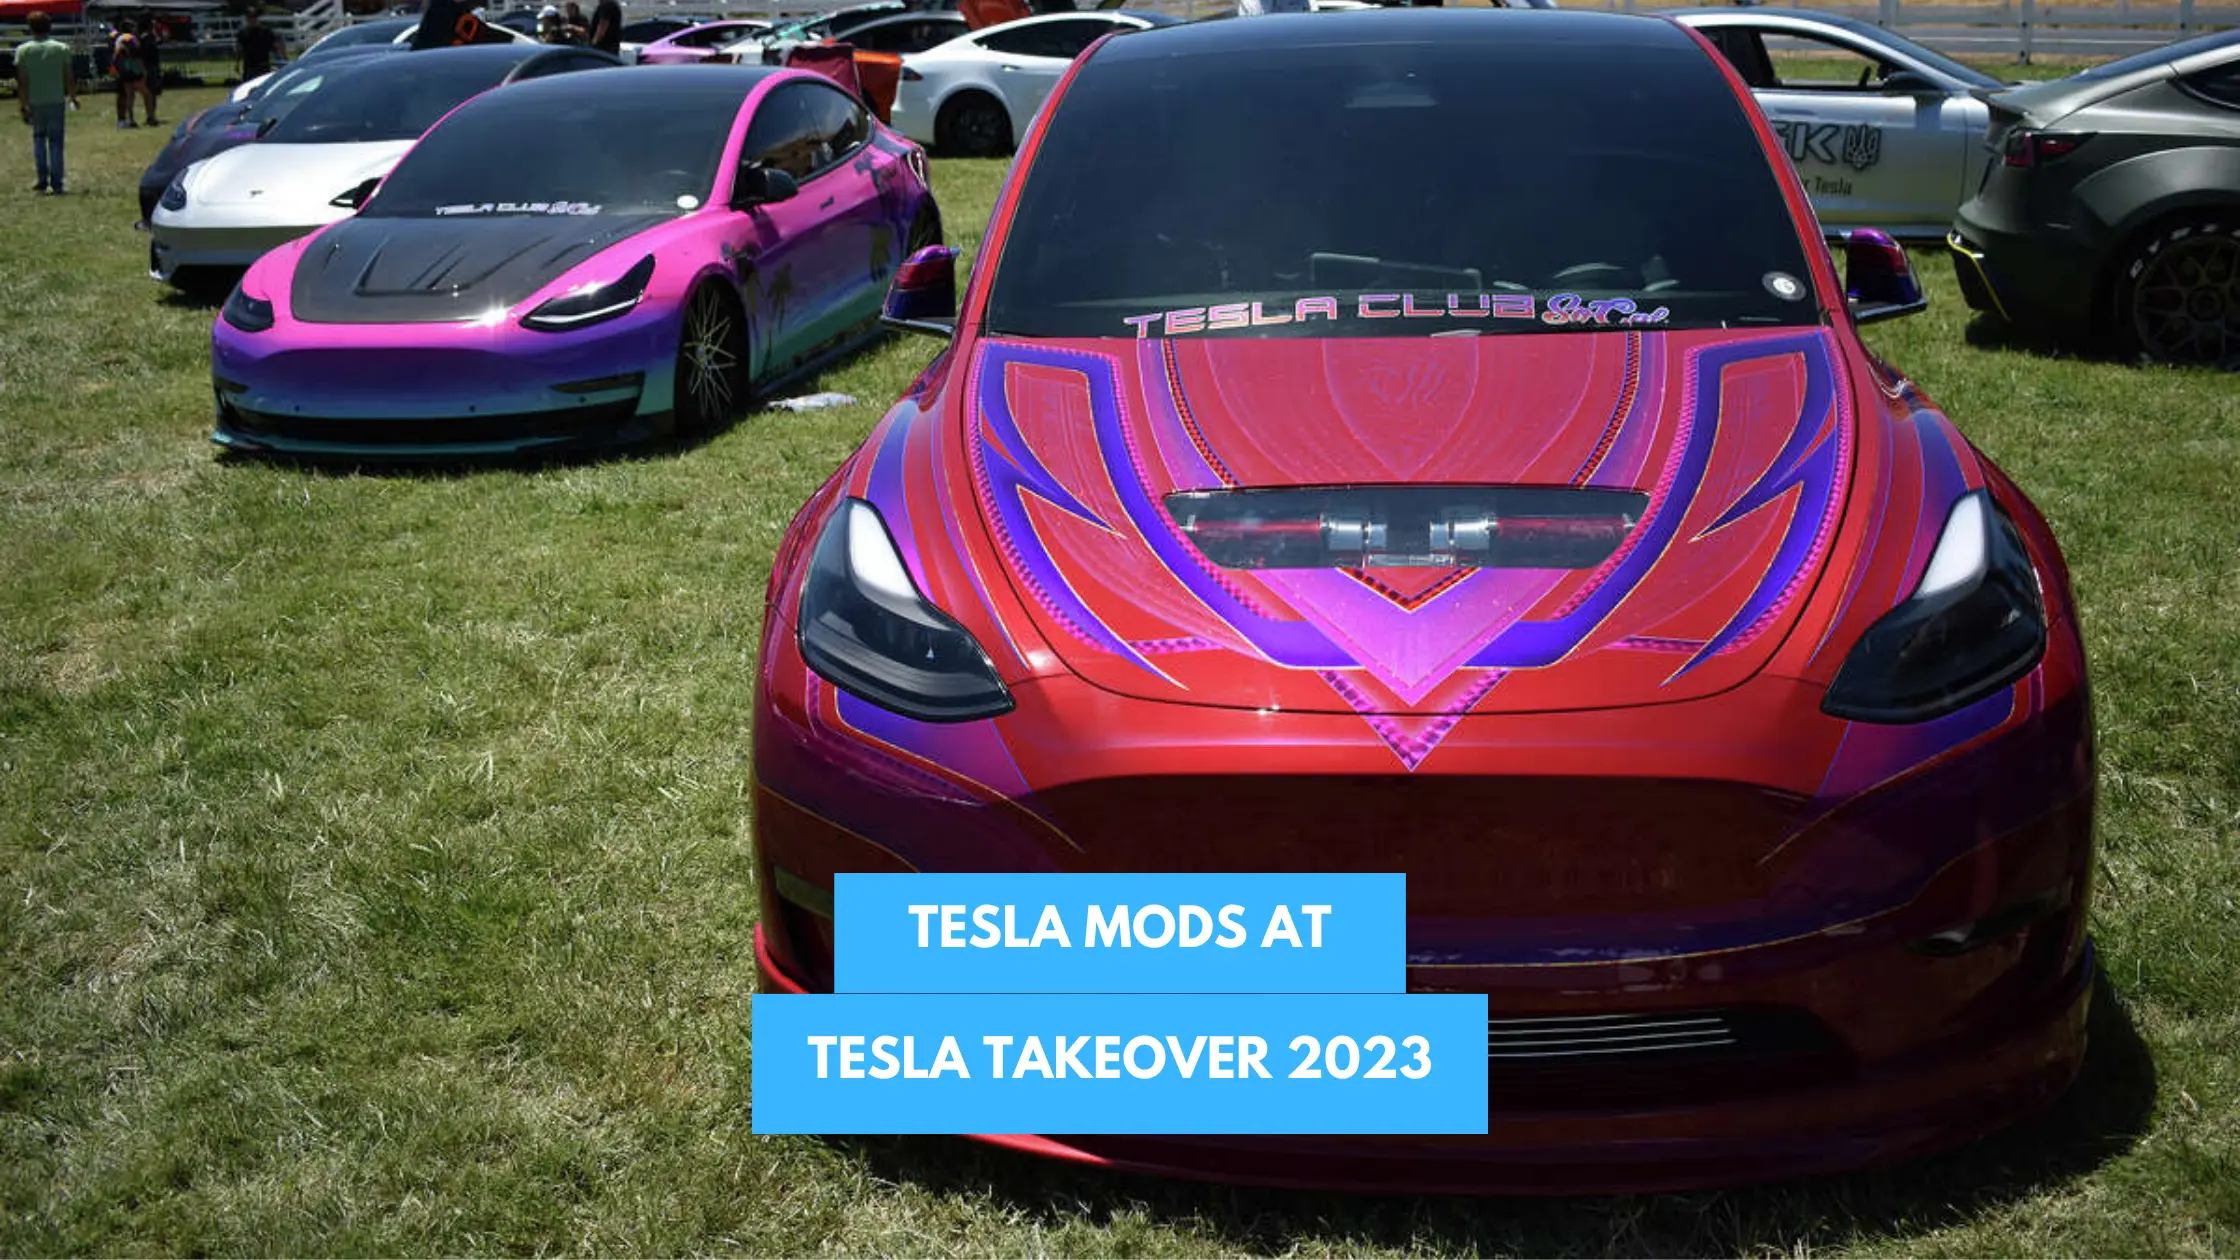 You are currently viewing Tesla Takeover 2023 – Here’s the Biggest Lot of Cotumized Teslas